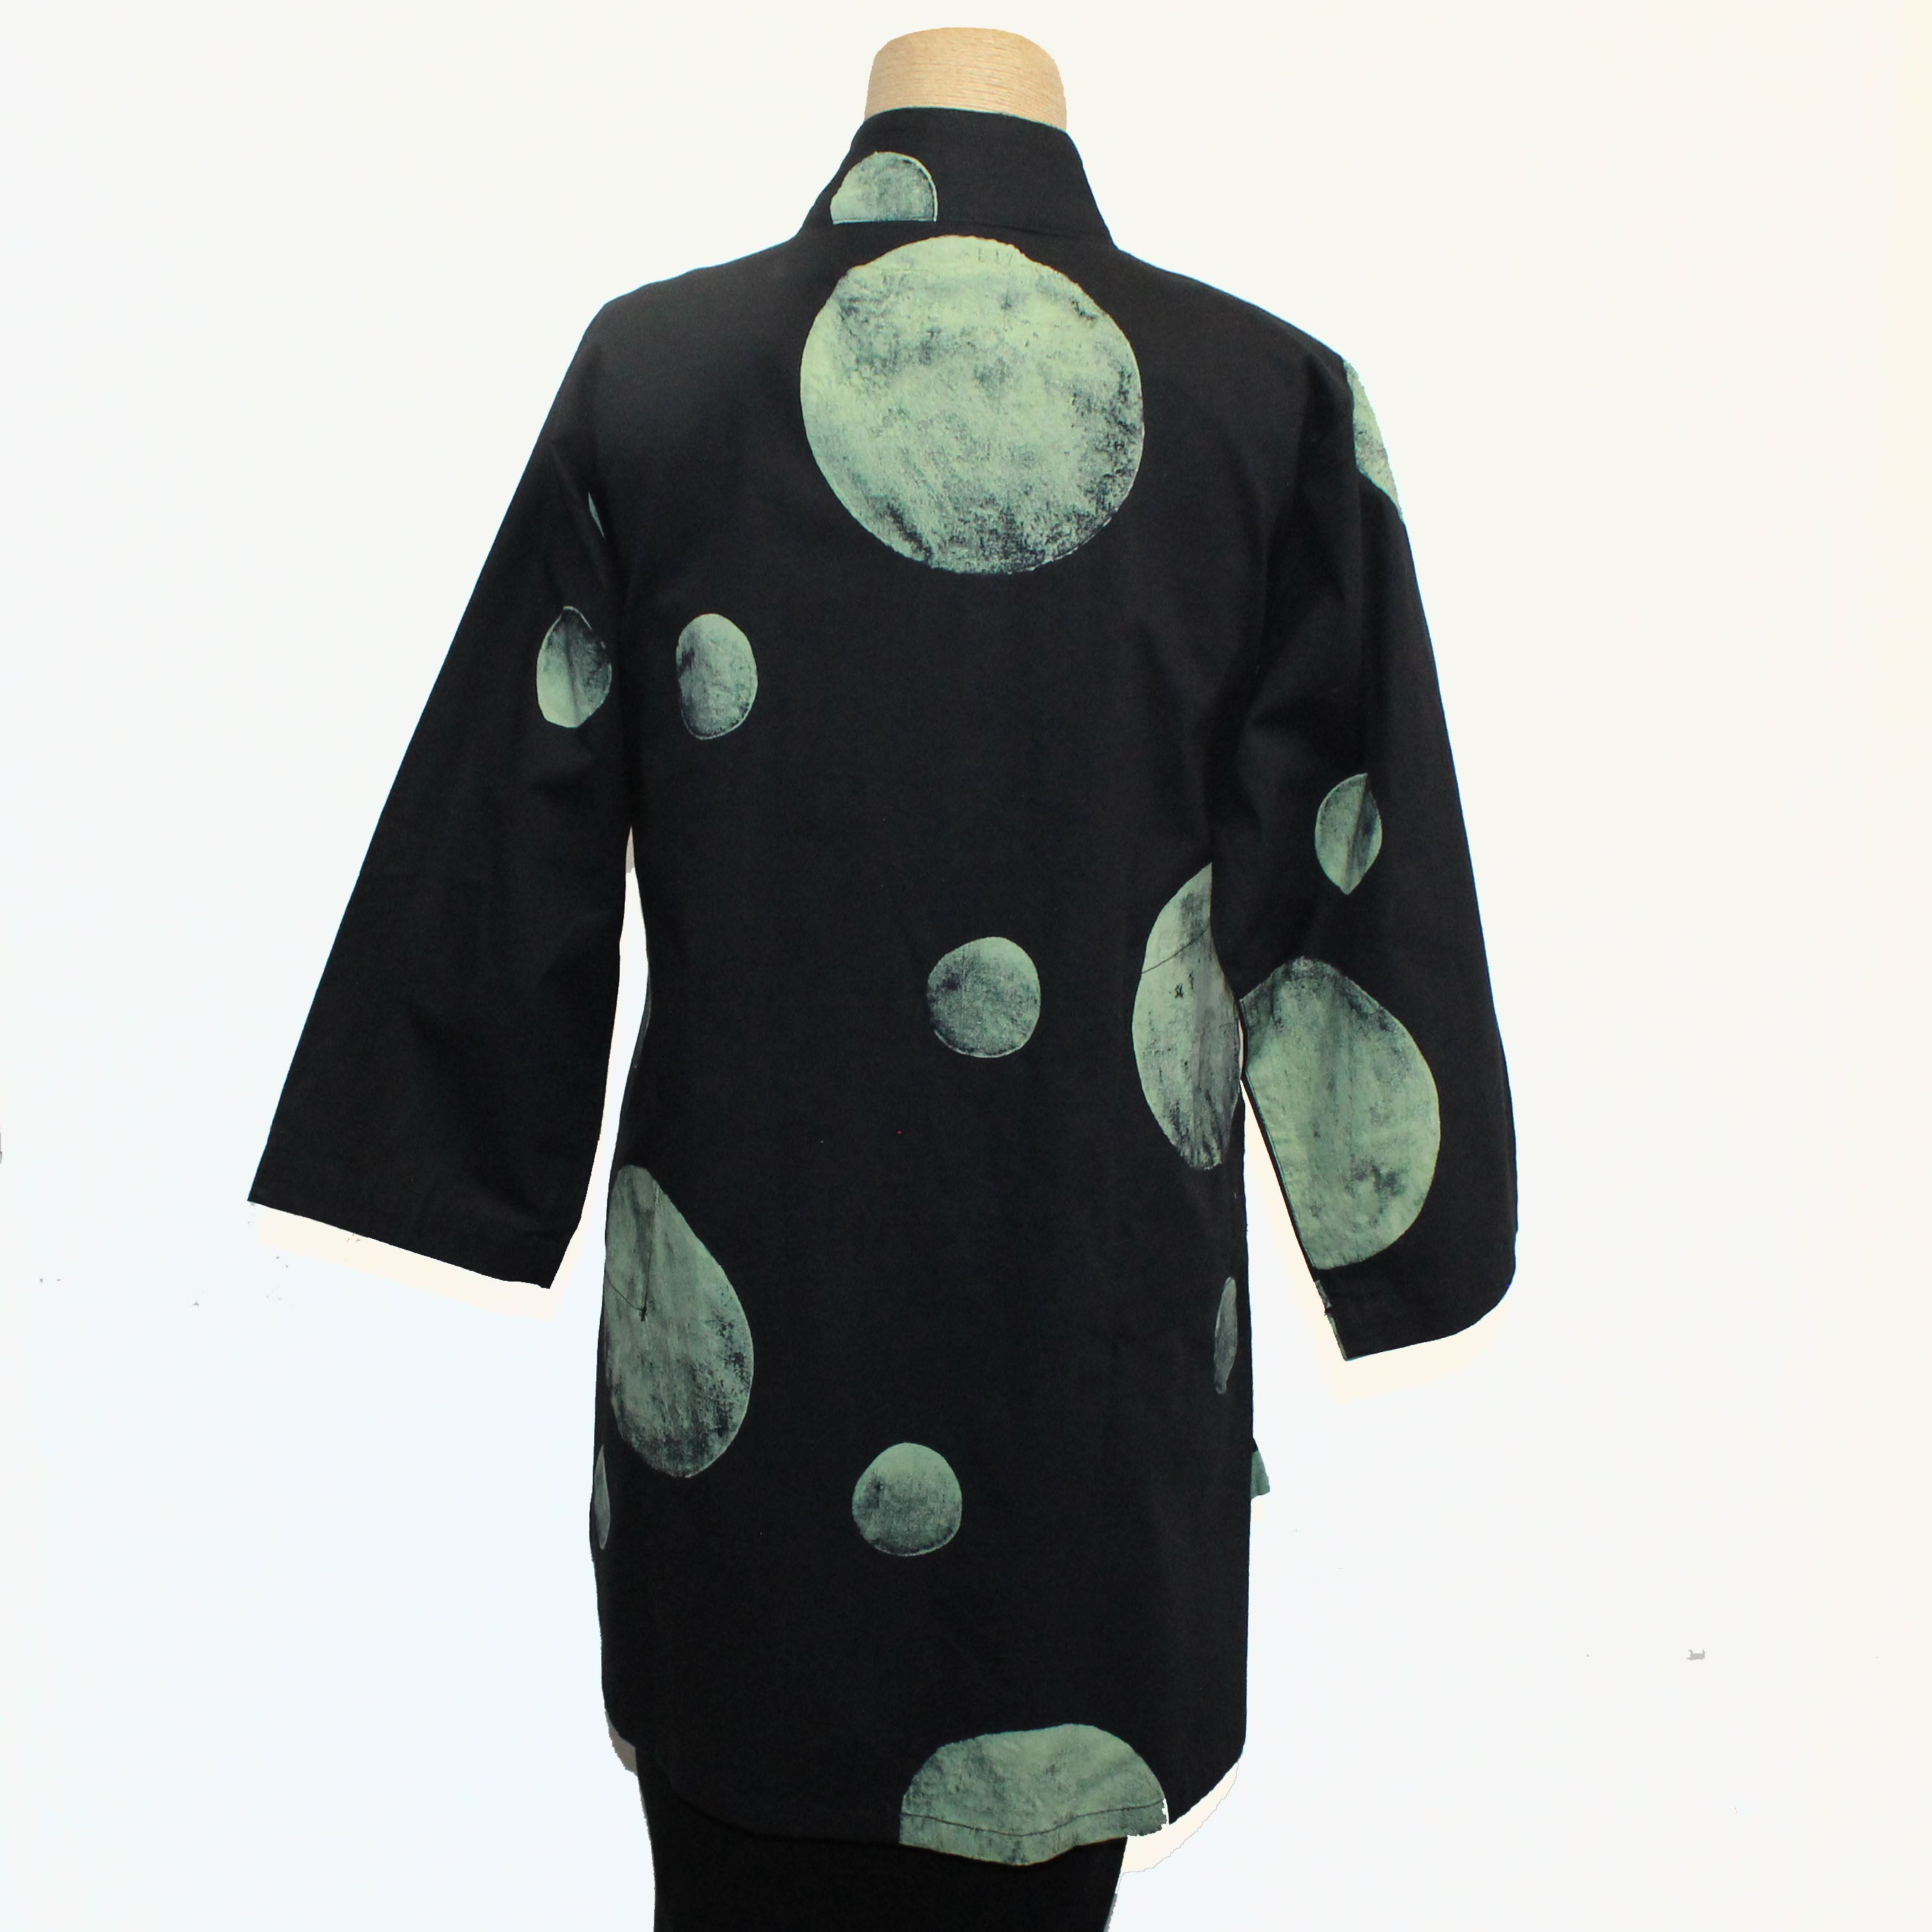 Adverb Shirt, Therefore, Moon, Black/Mint XS